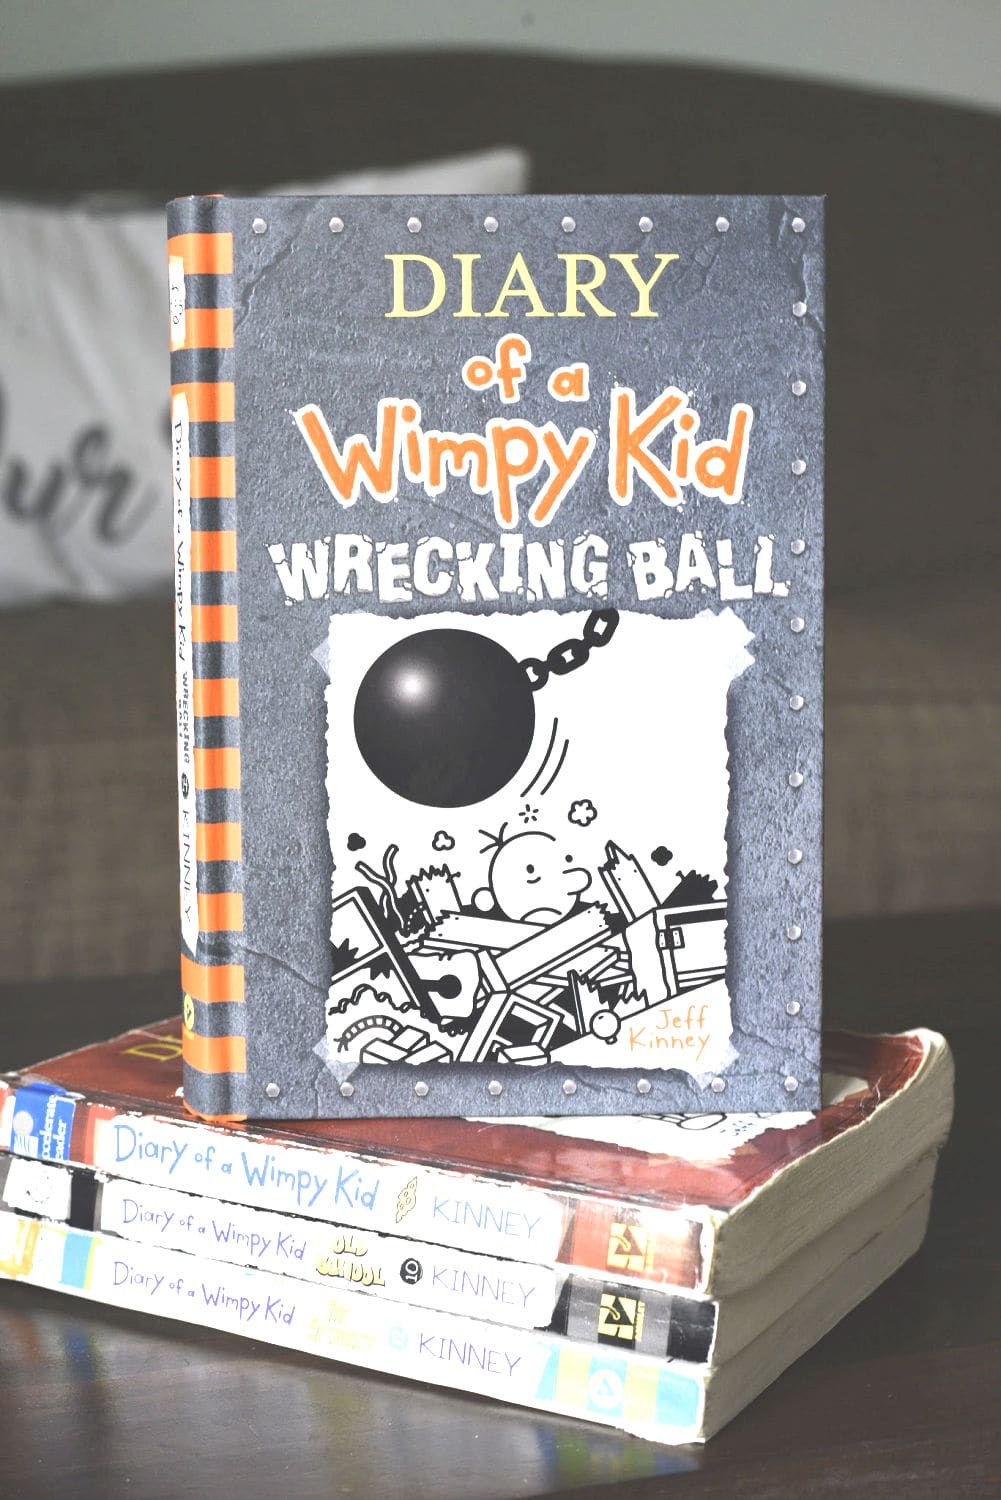 New Diary of a Wimpy Kid Book